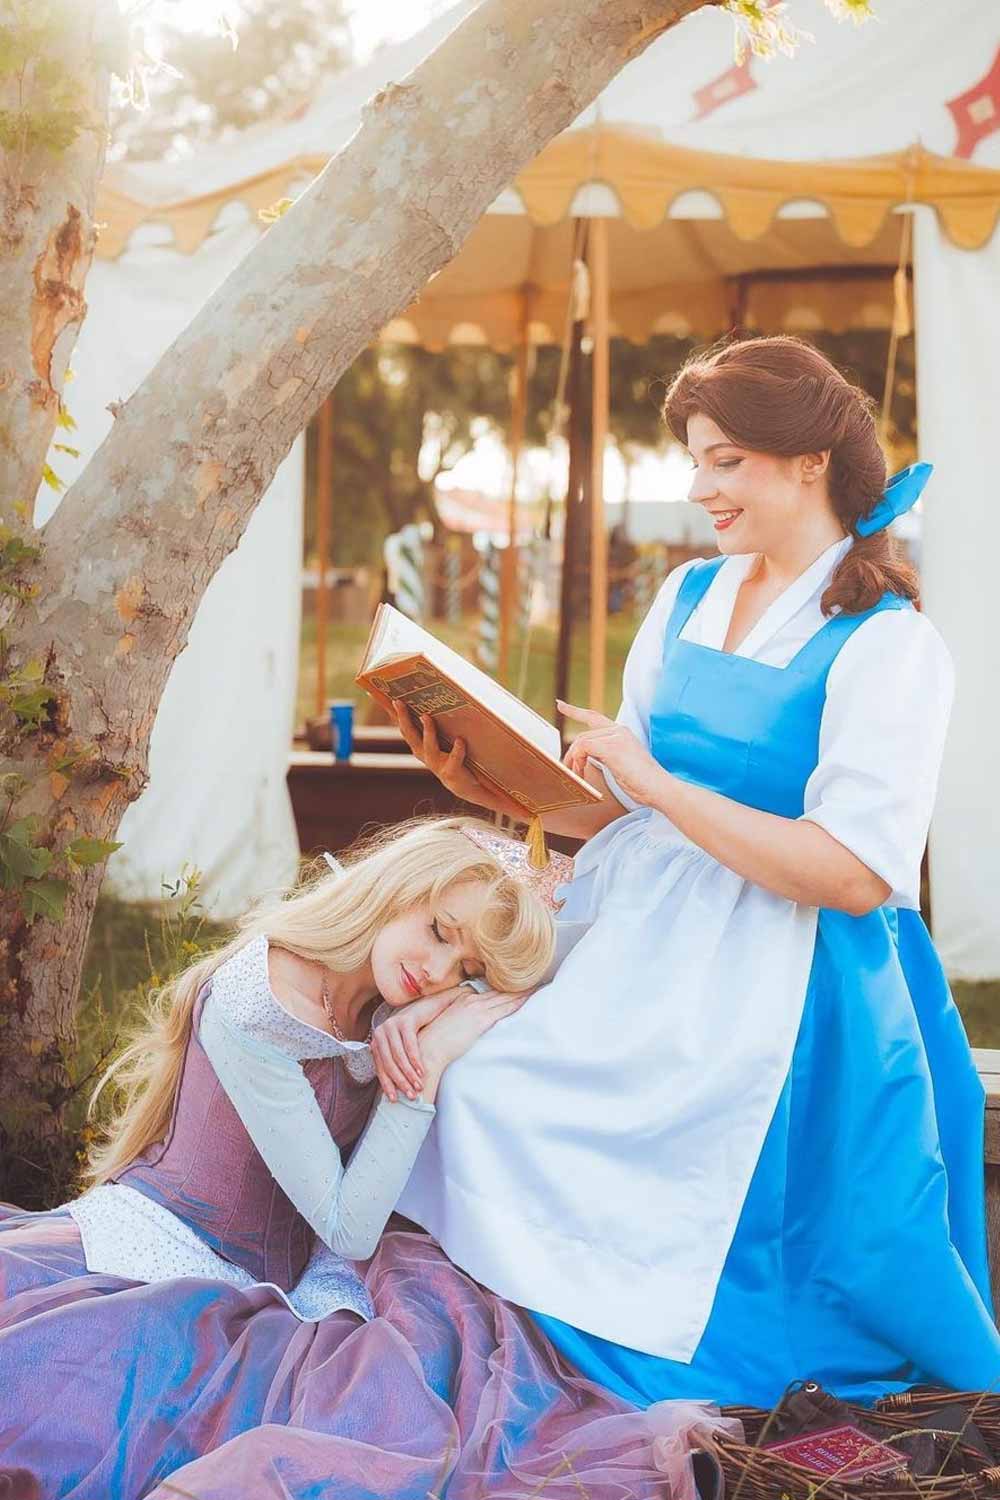 Sleeping Beauty and Cinderella Halloween Costumes for Best Friends